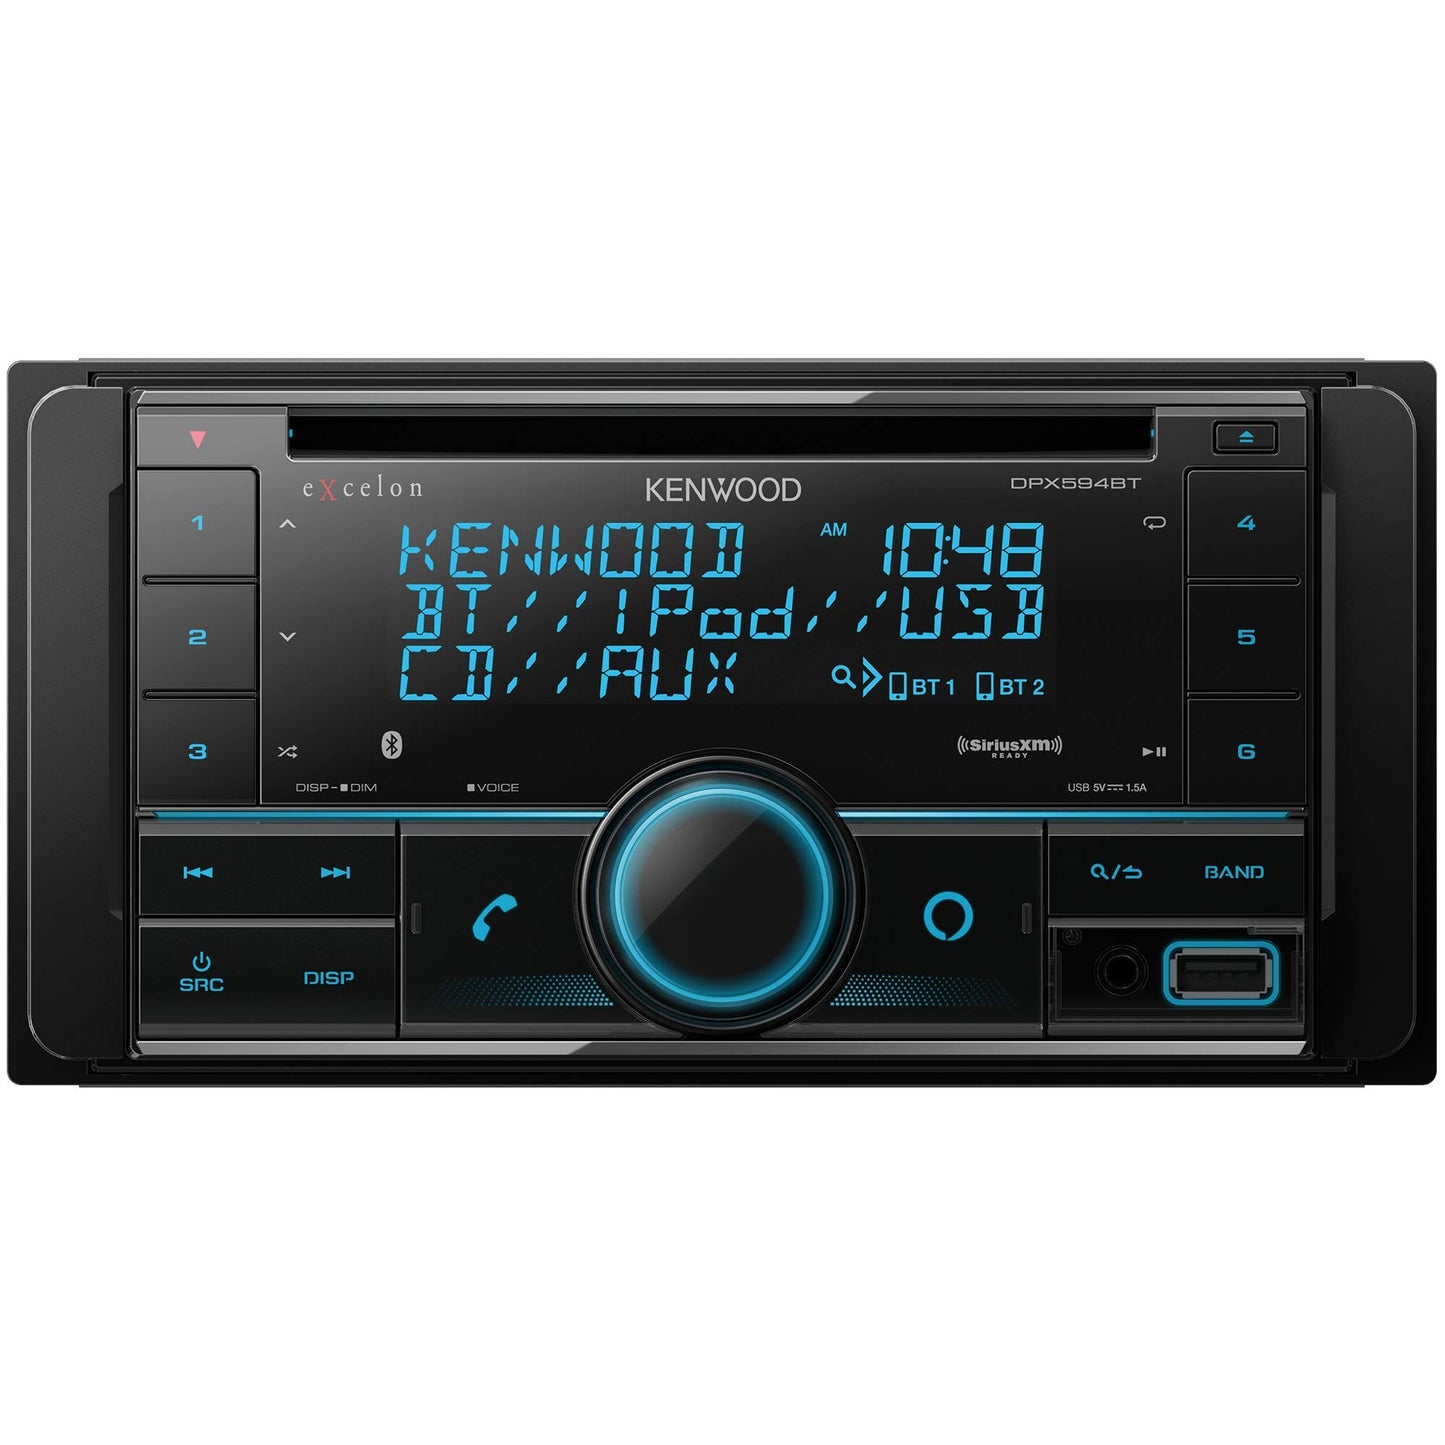 Kenwood DPX594BT AM FM CD Bluetooth Car Stereo with Amazon Alexa